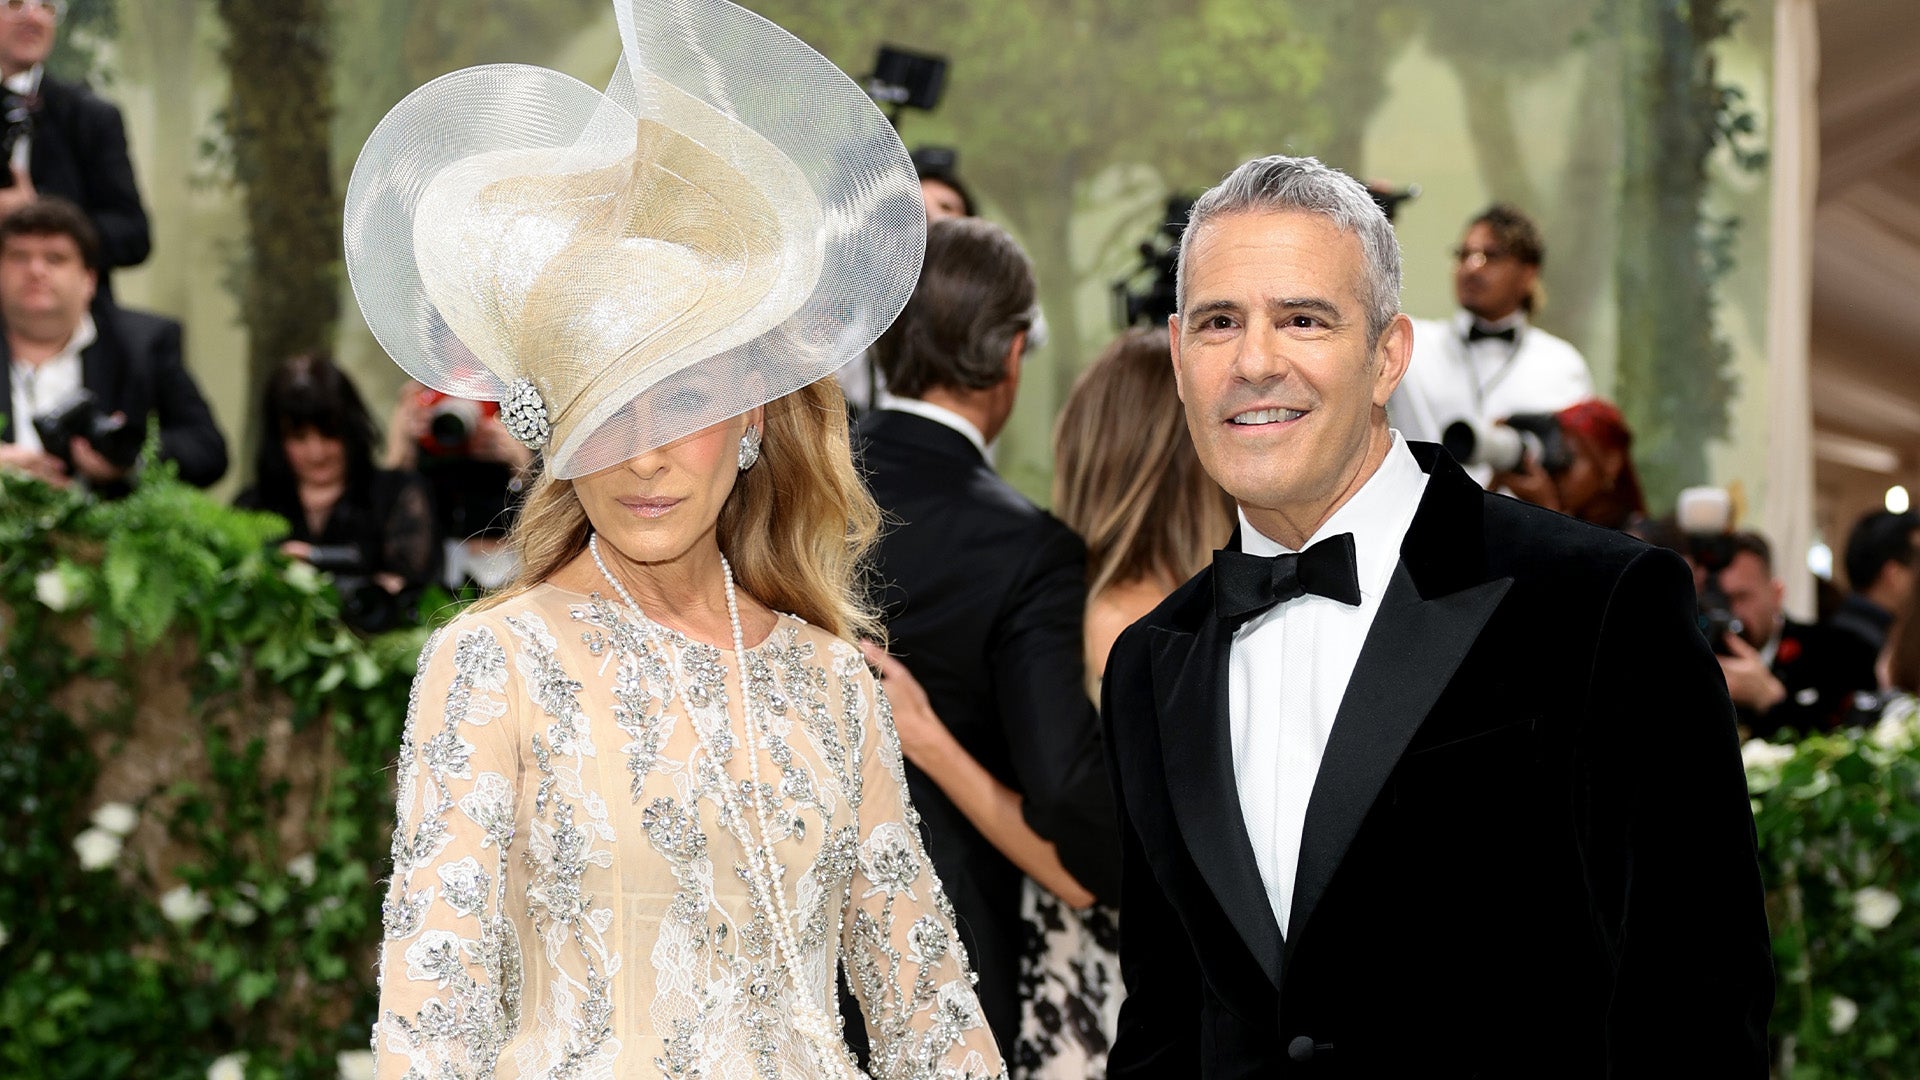 Sarah Jessica Parker and Andy Cohen Reunite for First Met Gala Together in 6 Years